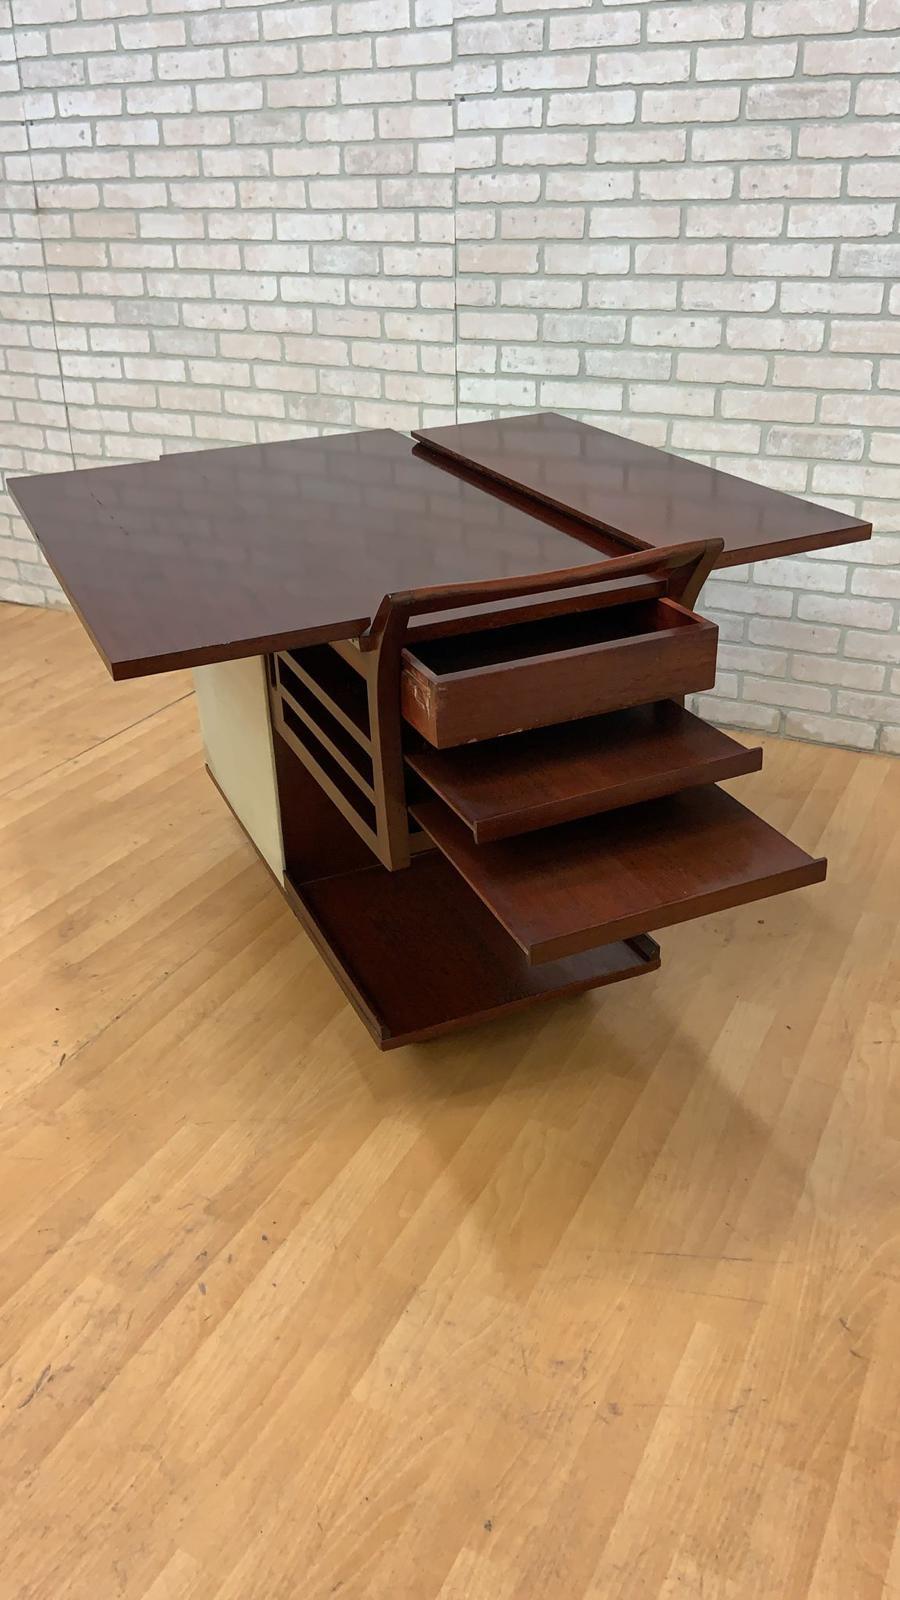 Mid-Century Modern Paul Frankl Expanding Serving Cart

Super cool and rate vintage mahogany Paul Frankl serving/bar cart. One side has a drawer and 2 pullout shelves. The other side has a door that opens up to a compartment with 2 shelves. The top